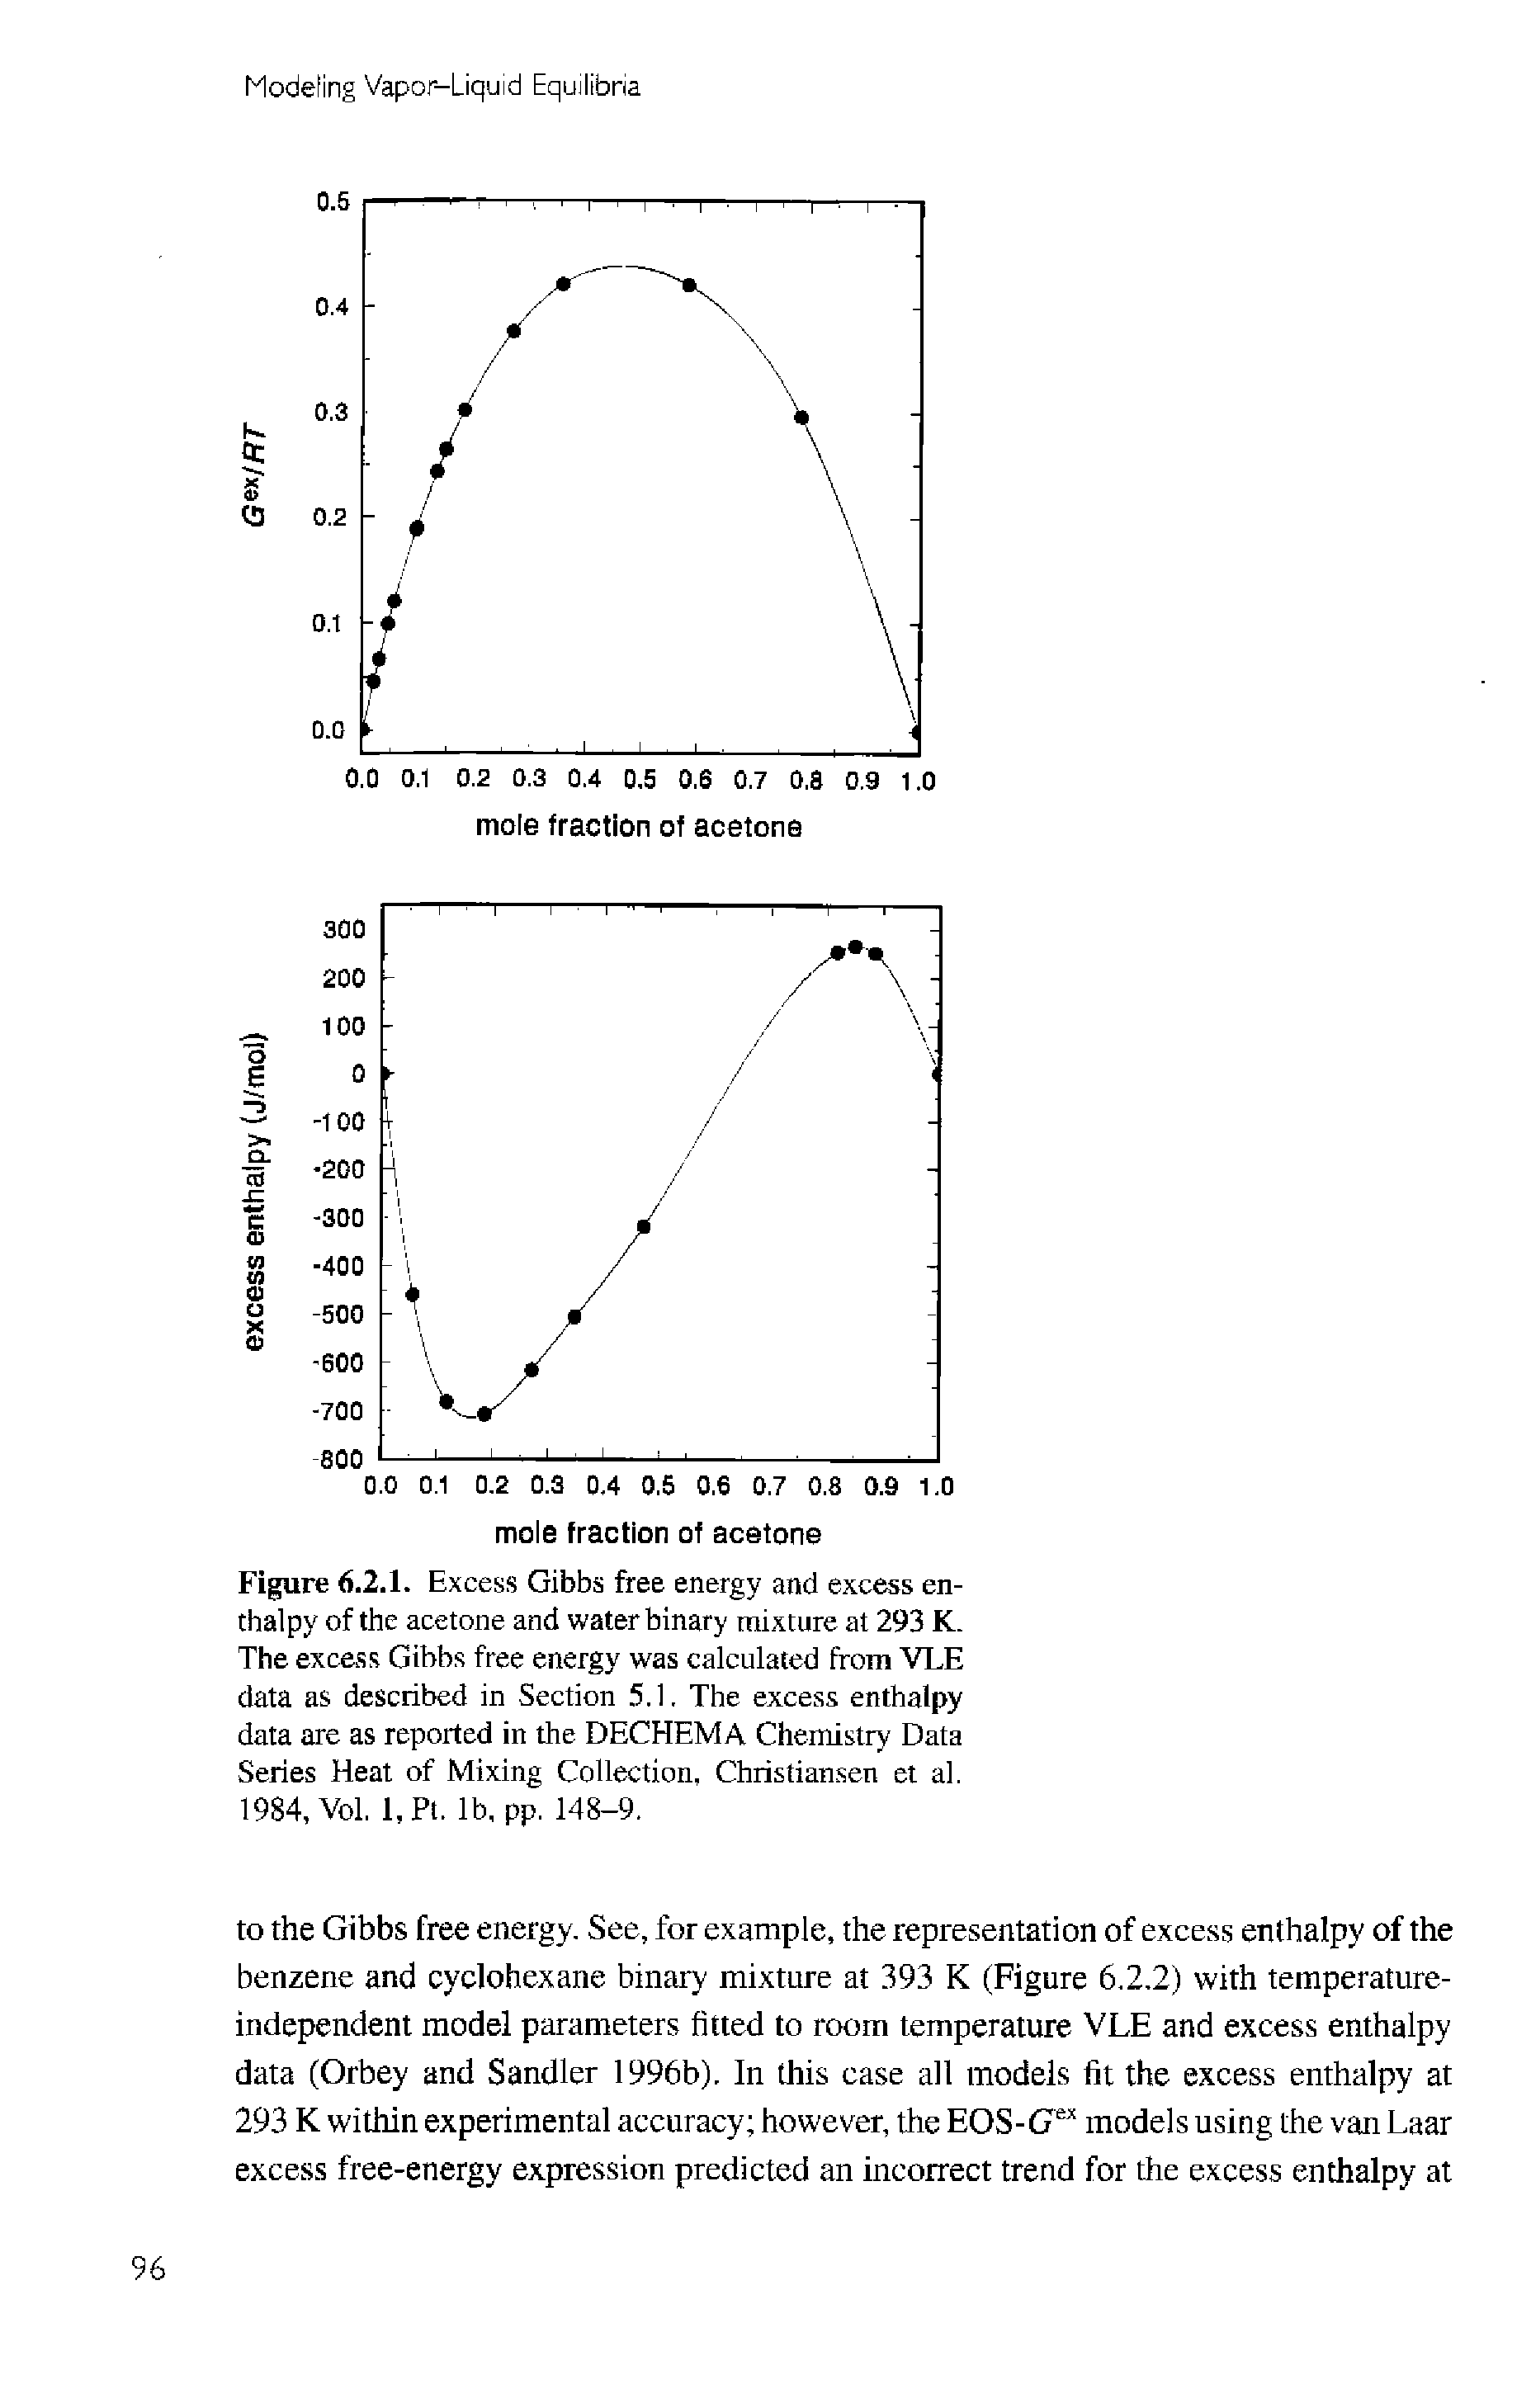 Figure 6.2.1. Excess Gibbs free energy and excess enthalpy of the acetone and water binary mixture at 293 K. The excess Gibbs free energy was calculated from VLE data as described in Section 5.1, The excess enthalpy data are as reported in the DECHEMA Chemistry Data Series Heat of Mixing Collection, Christiansen et al. 19S4, Vol, l,Pt. lb, pp. 148-9.